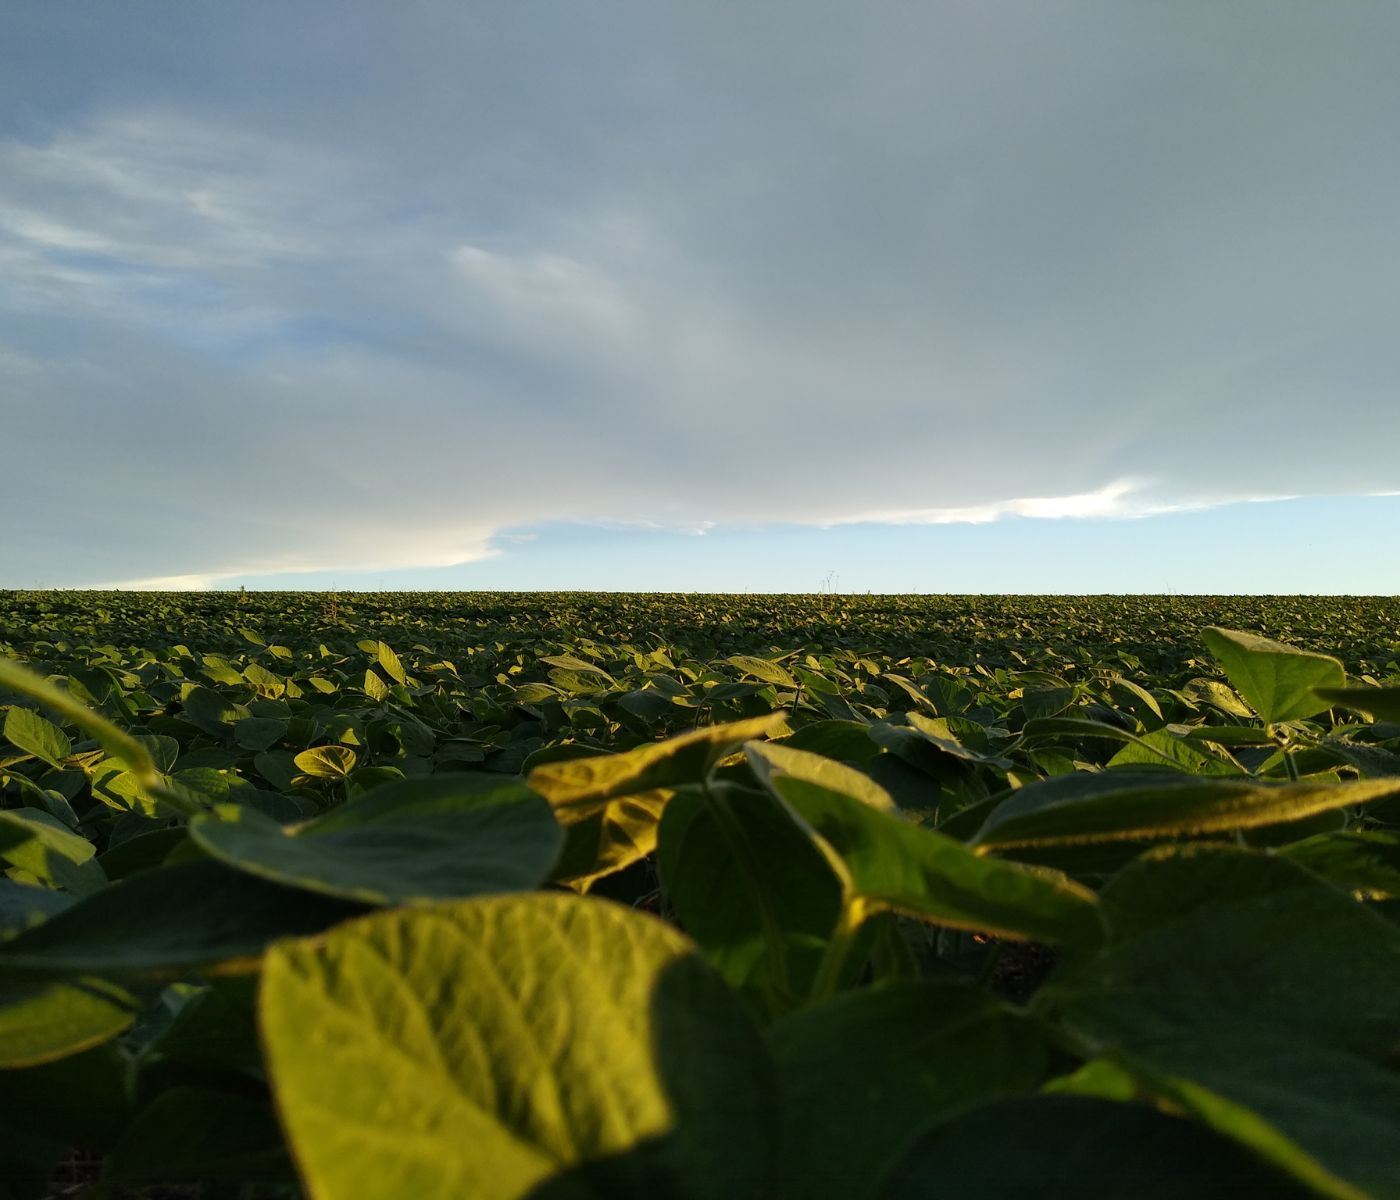 Climatic conditions favor South American soybean production